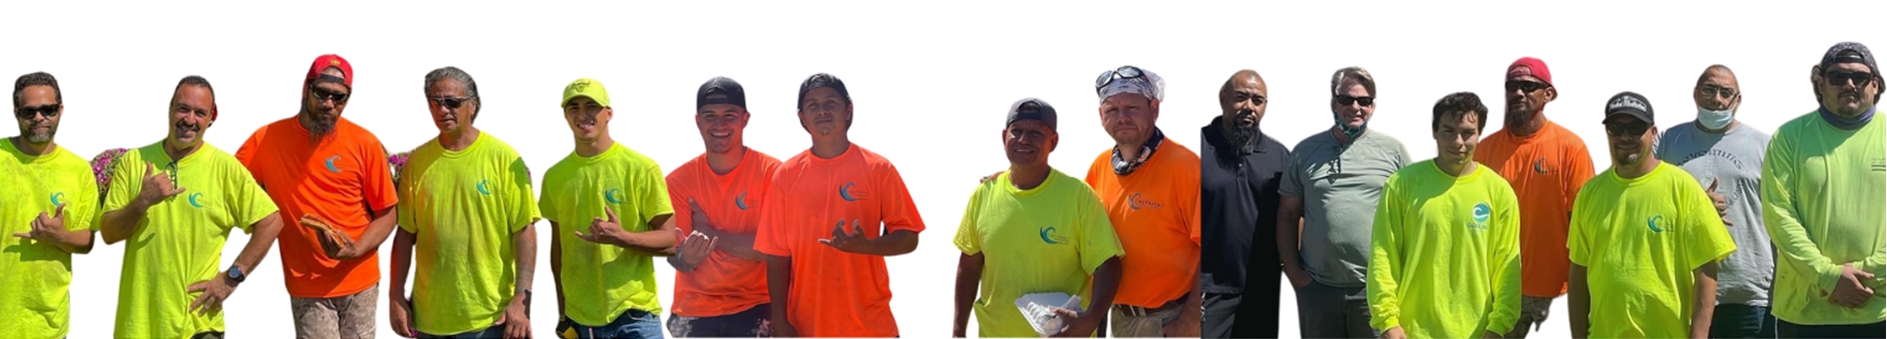 Castaway Group Employee photo from newsletter.PNG